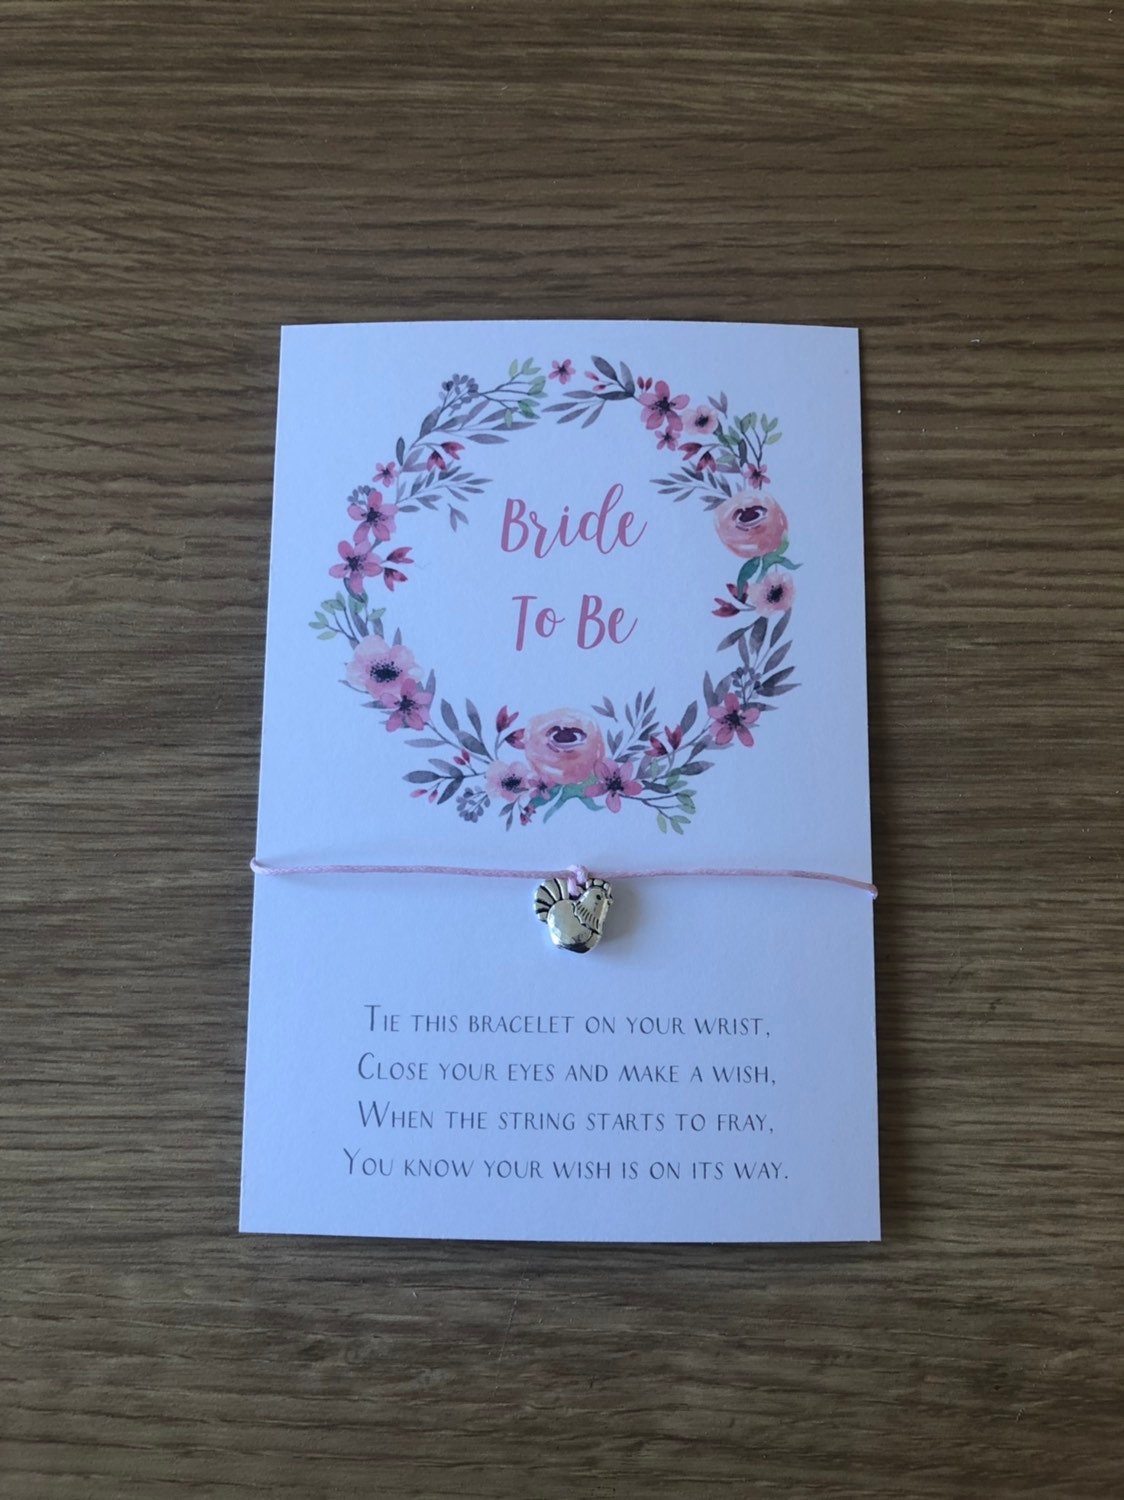 Hen party bridetribe 10pcs wish bracelet gifts personalised available 